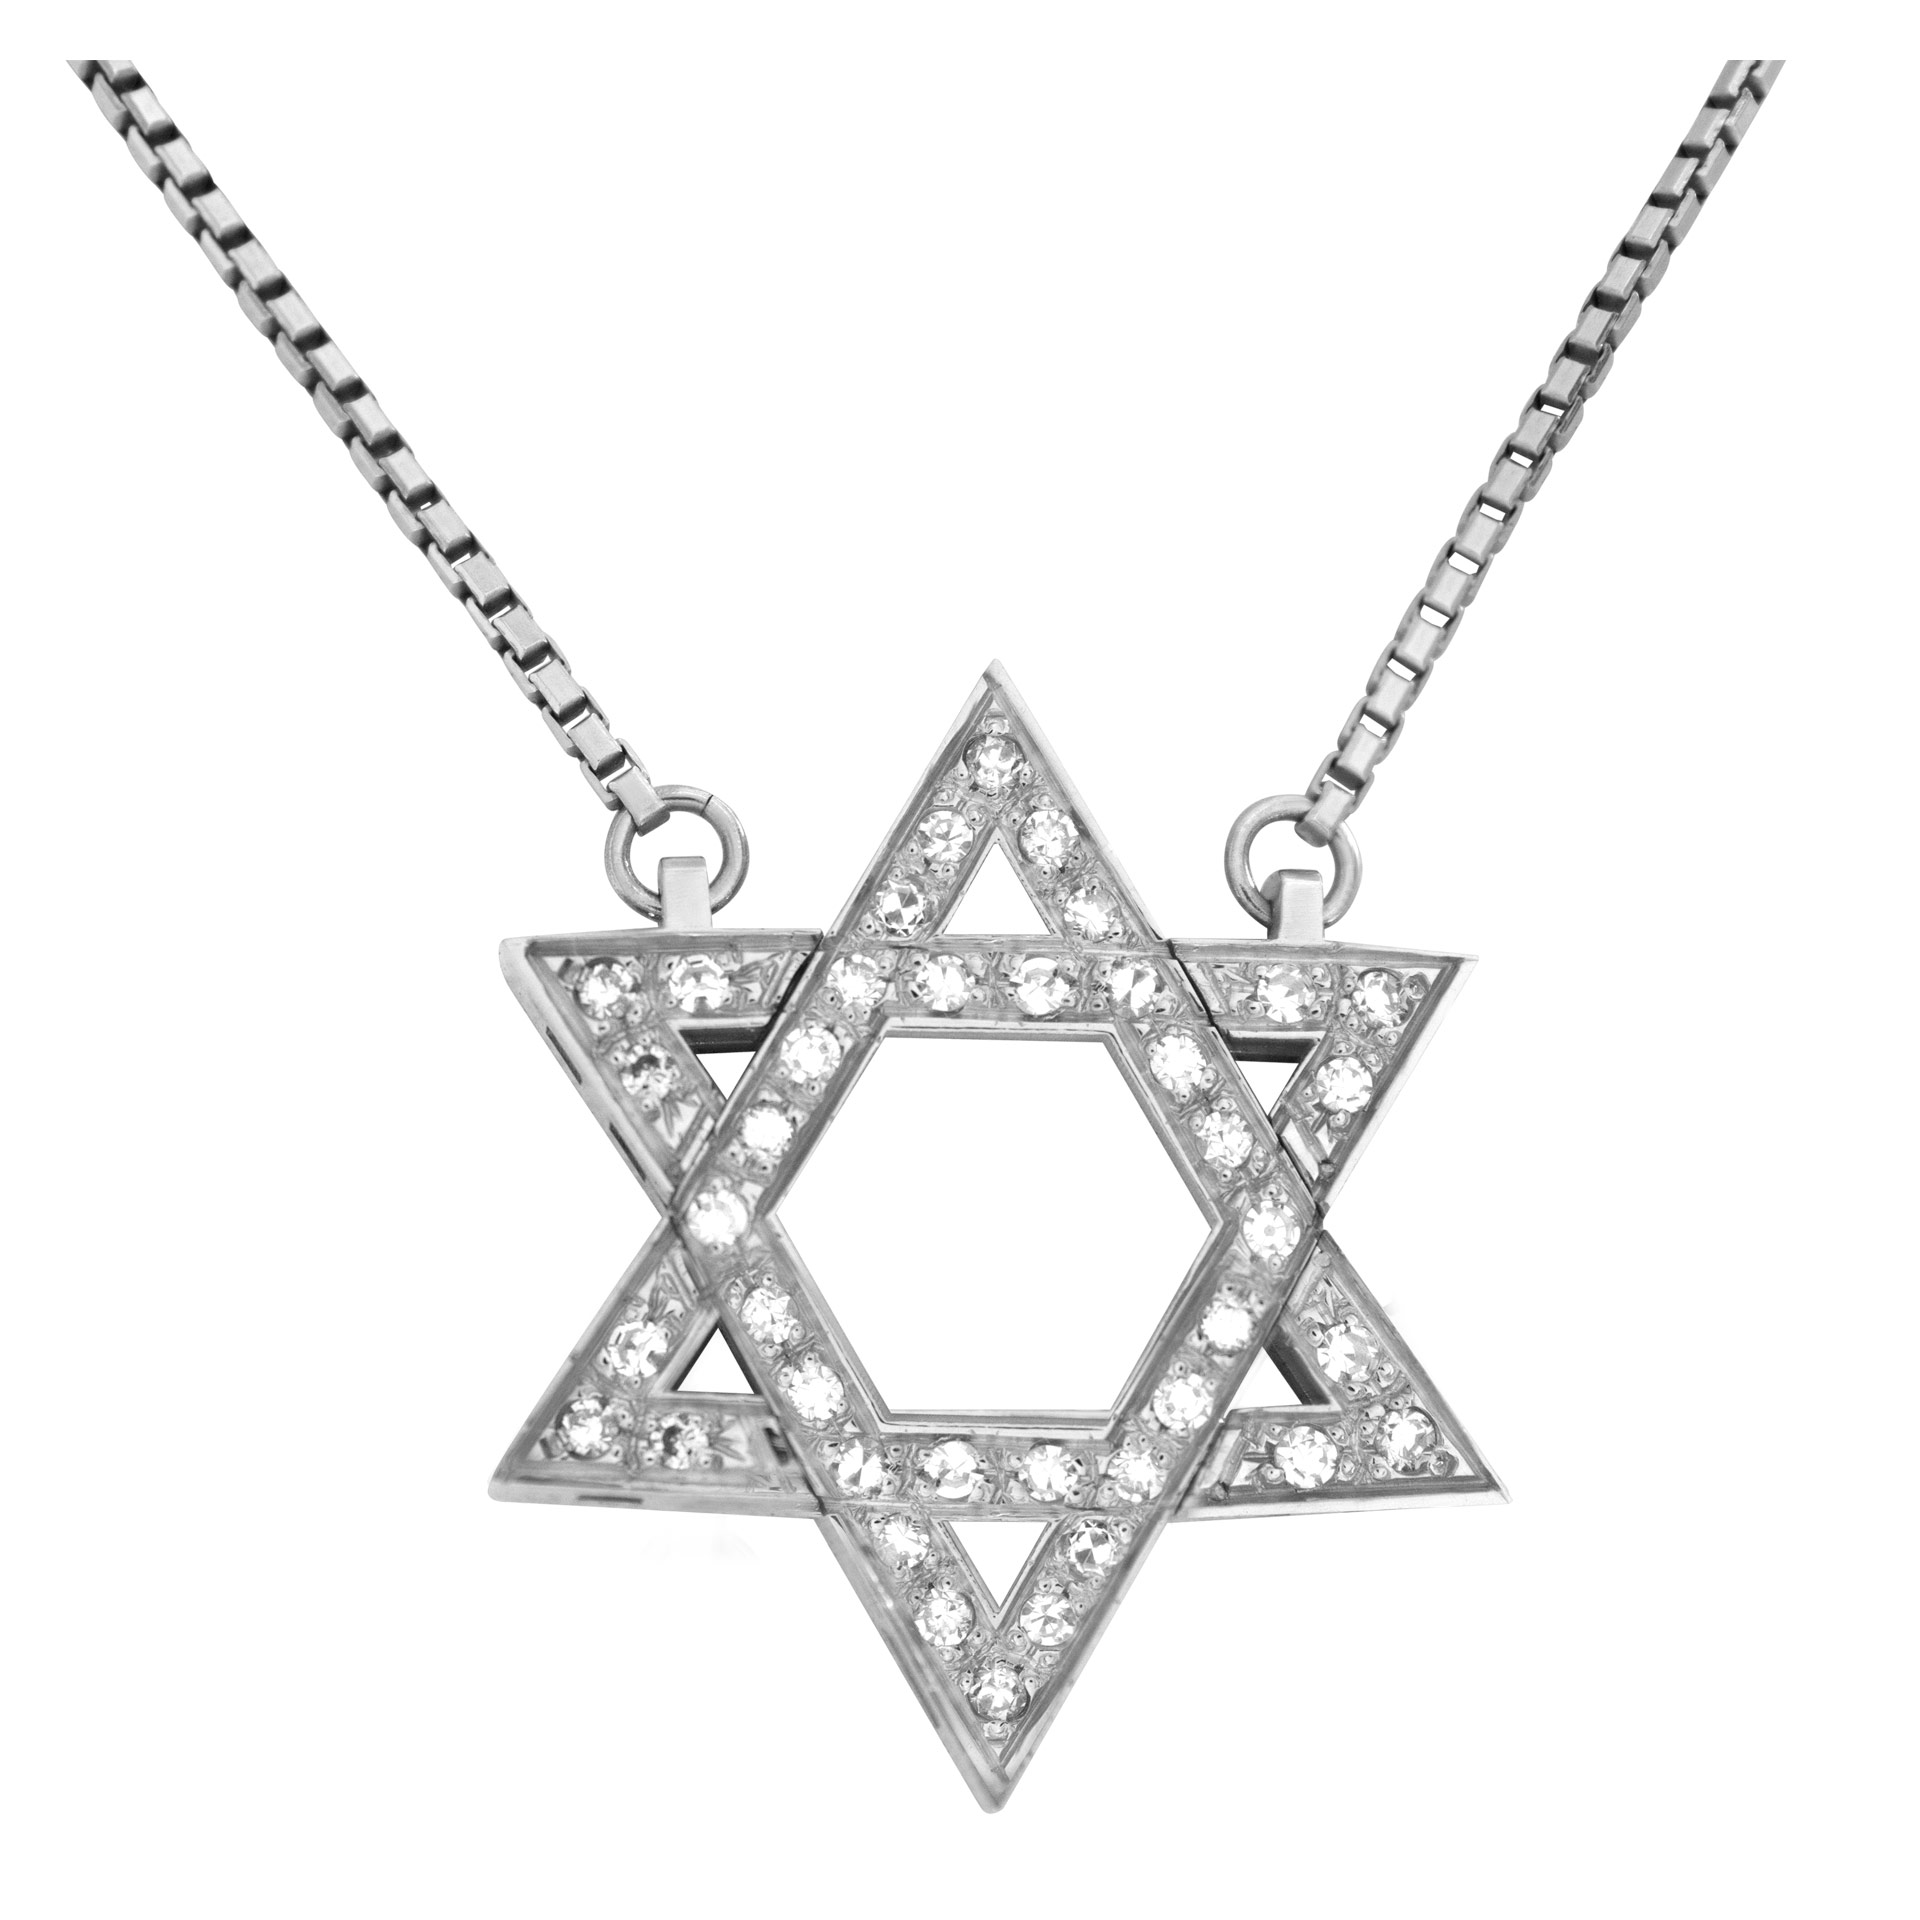 "Star of David" pendant with approximately 0.75 carat pave diamonds set in 18k white gold image 2